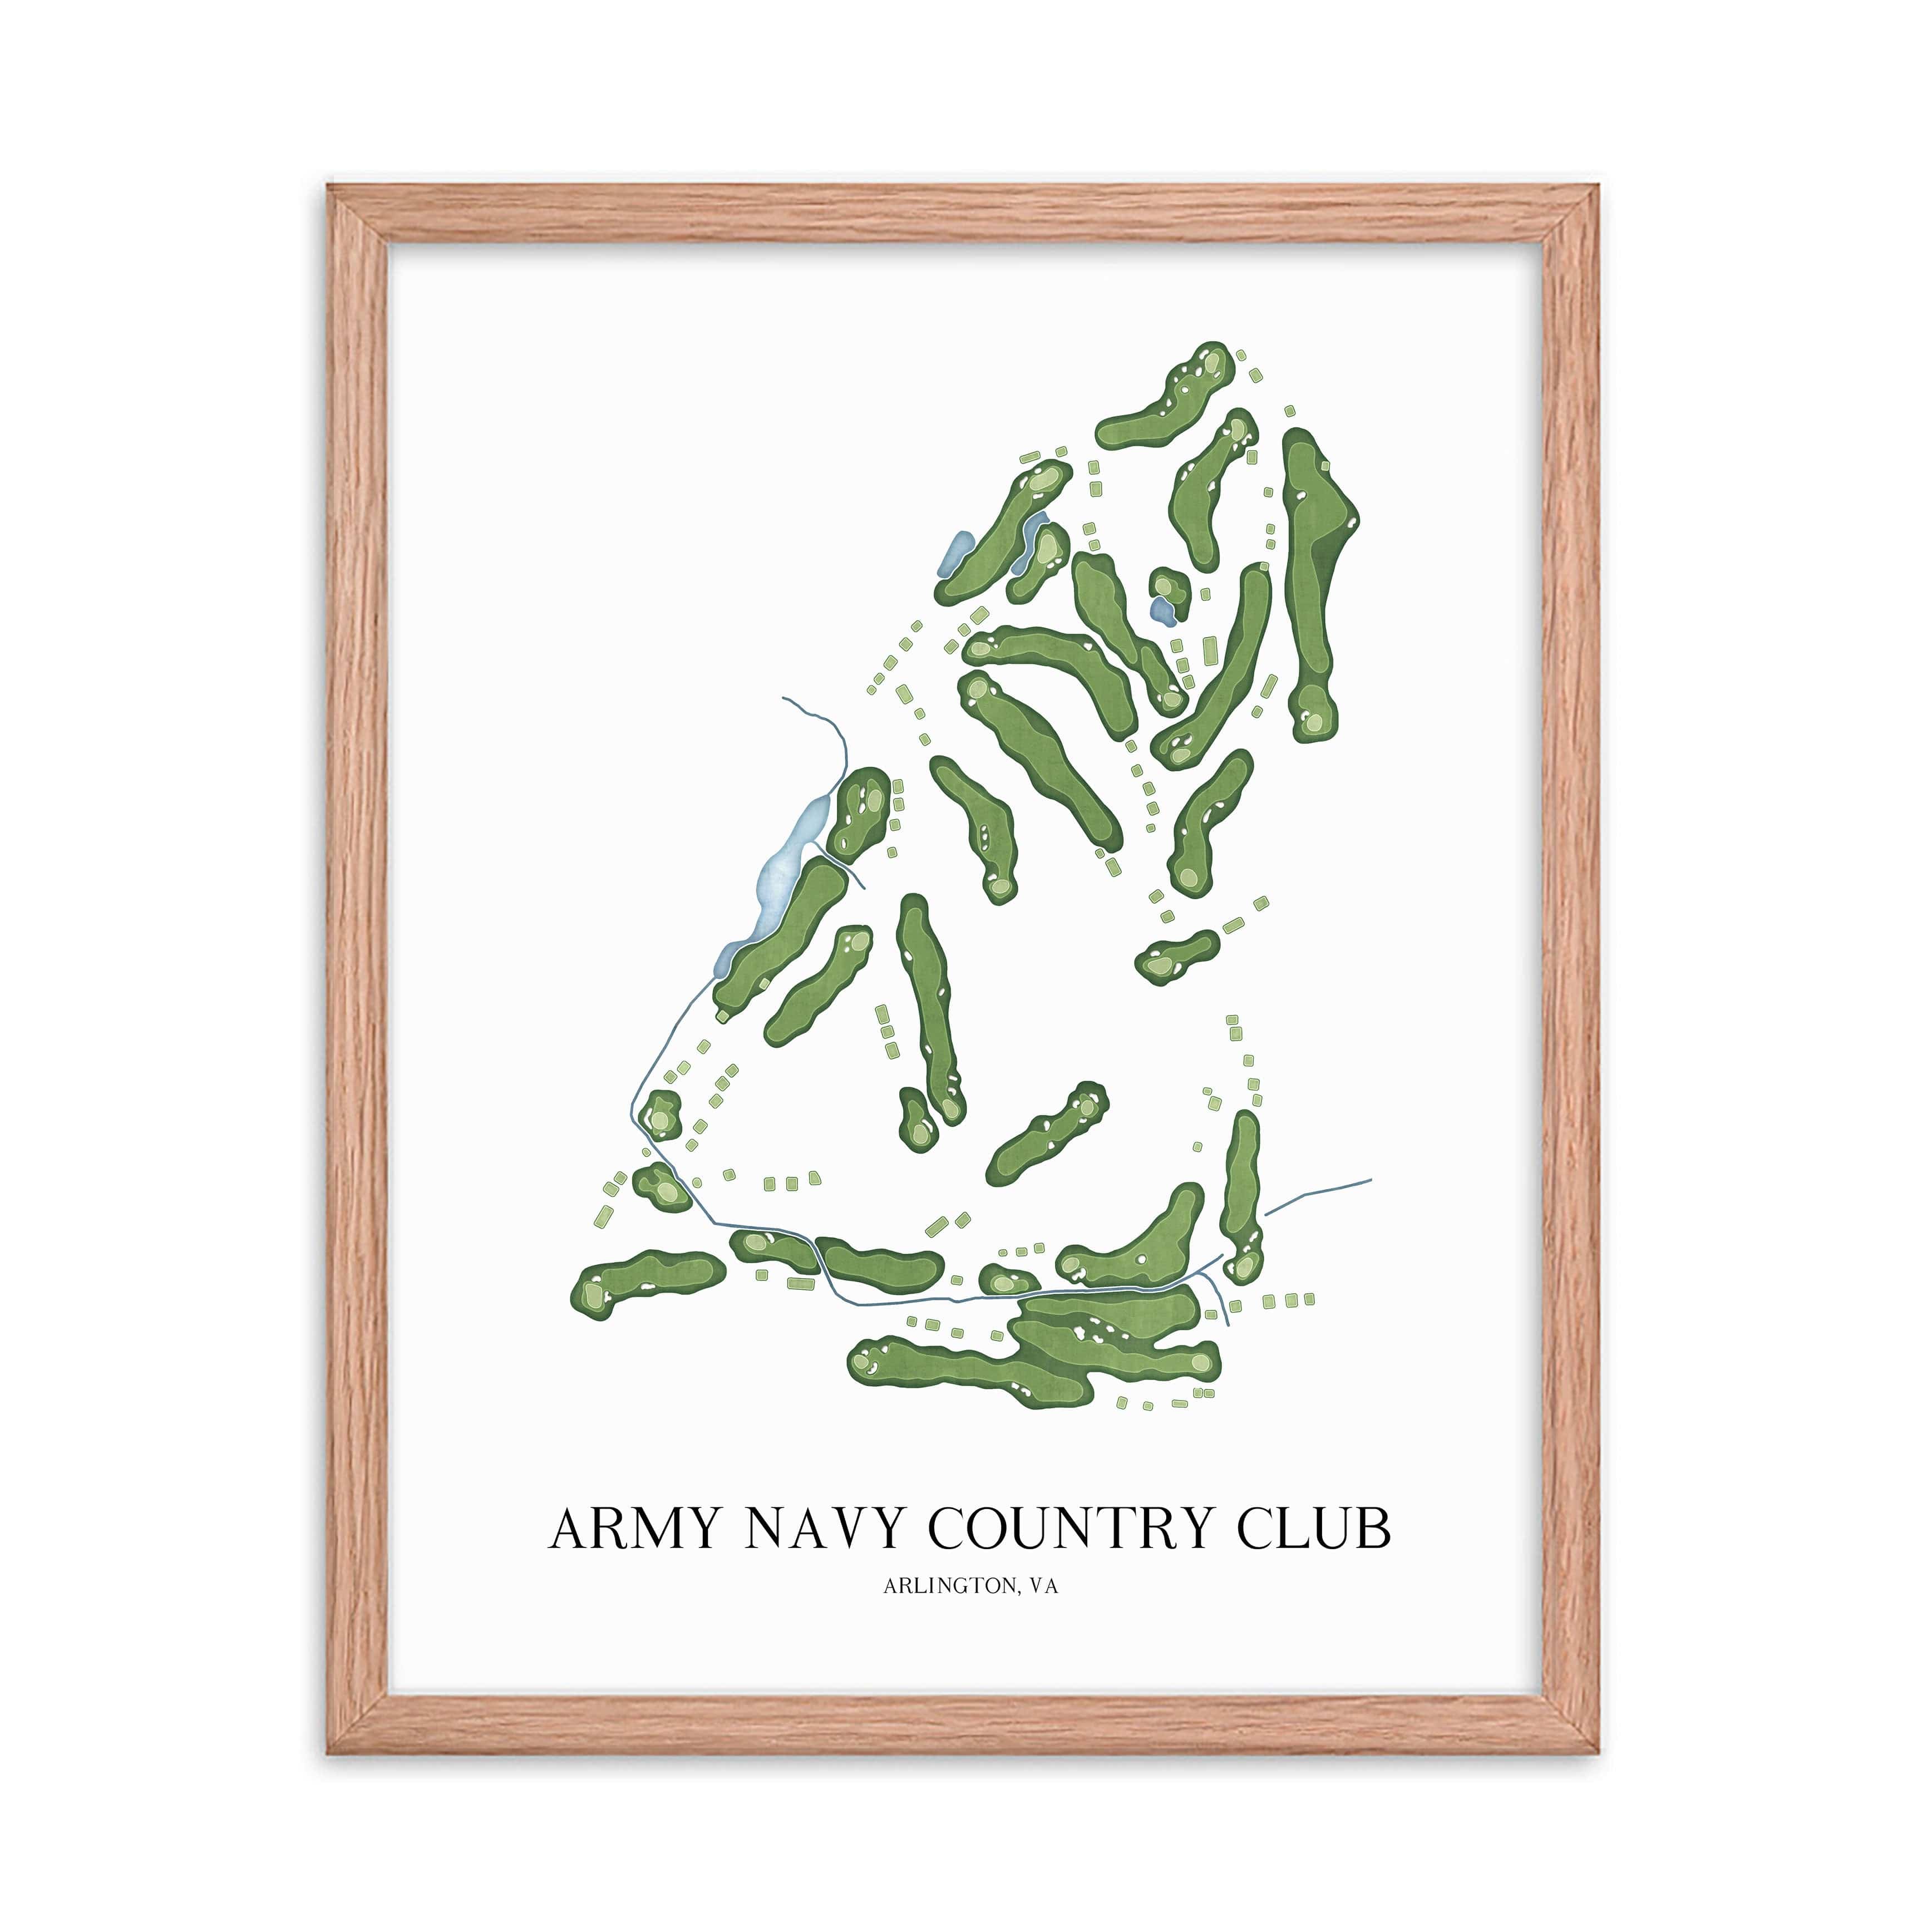 The 19th Hole Golf Shop - Golf Course Prints -  Army Navy Country Club - Arlington Golf Course Map